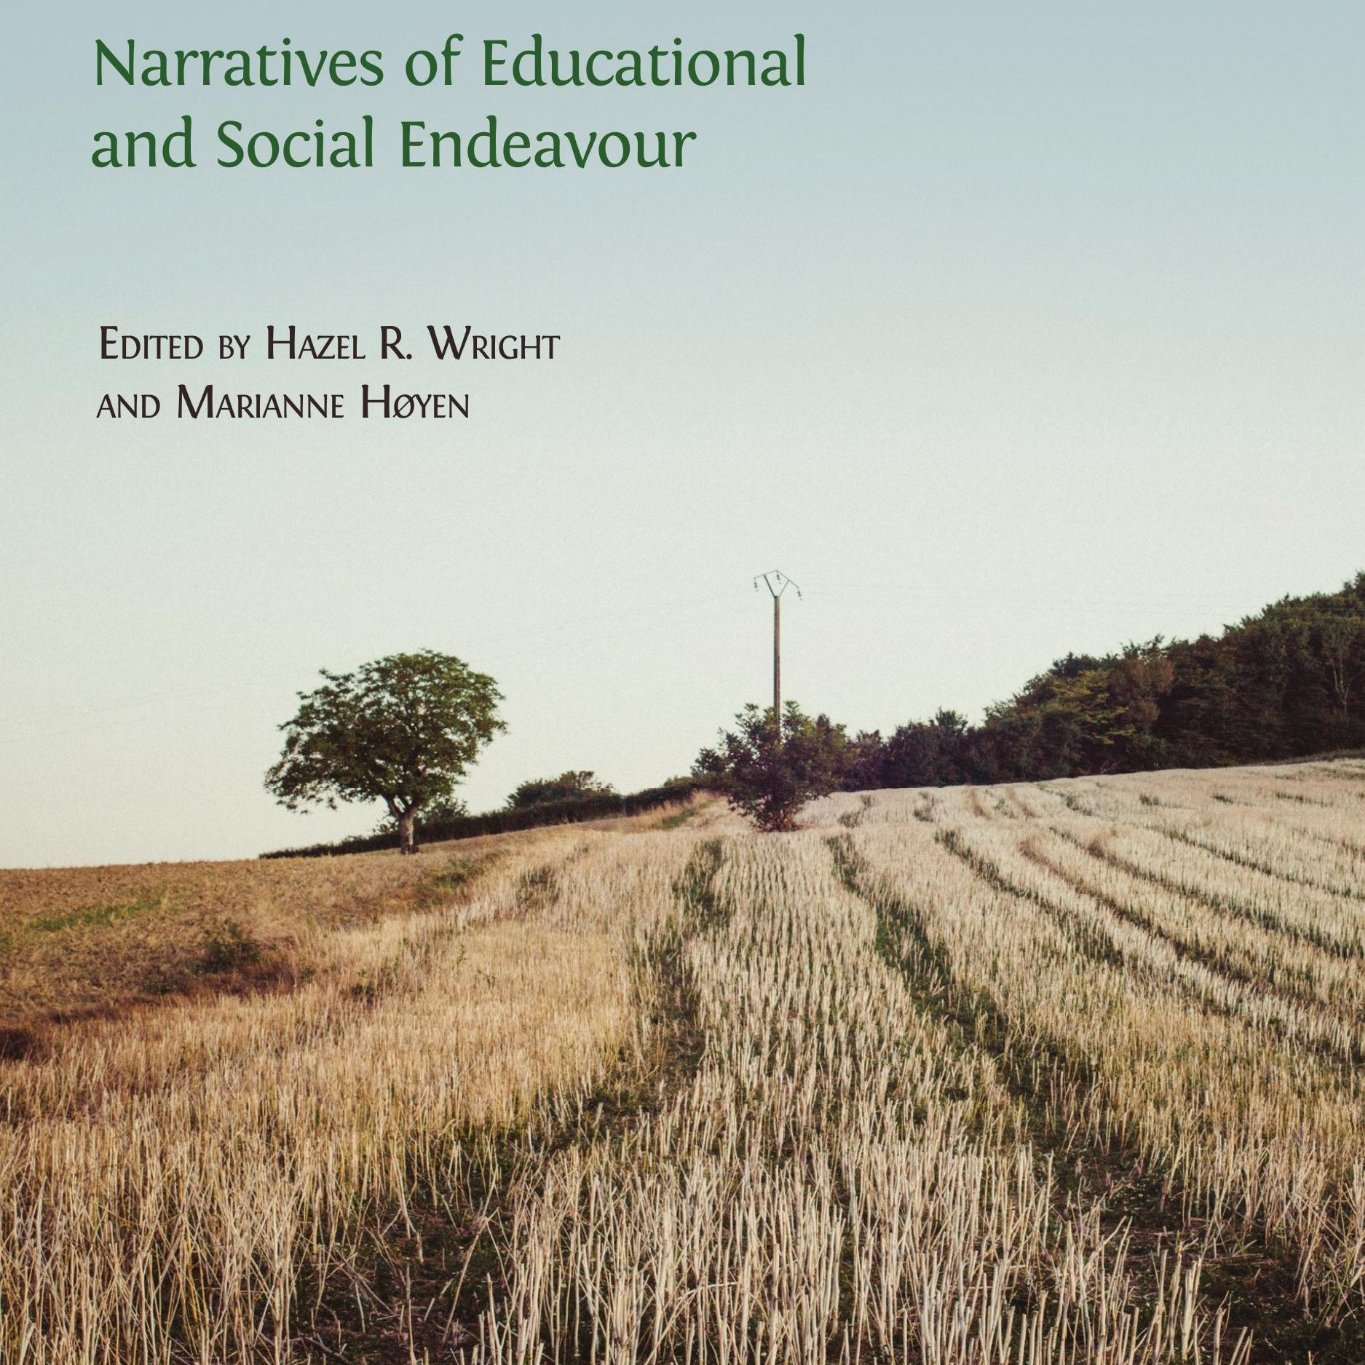 Discourses We Live By. Narratives of Educational and Social Endeavour